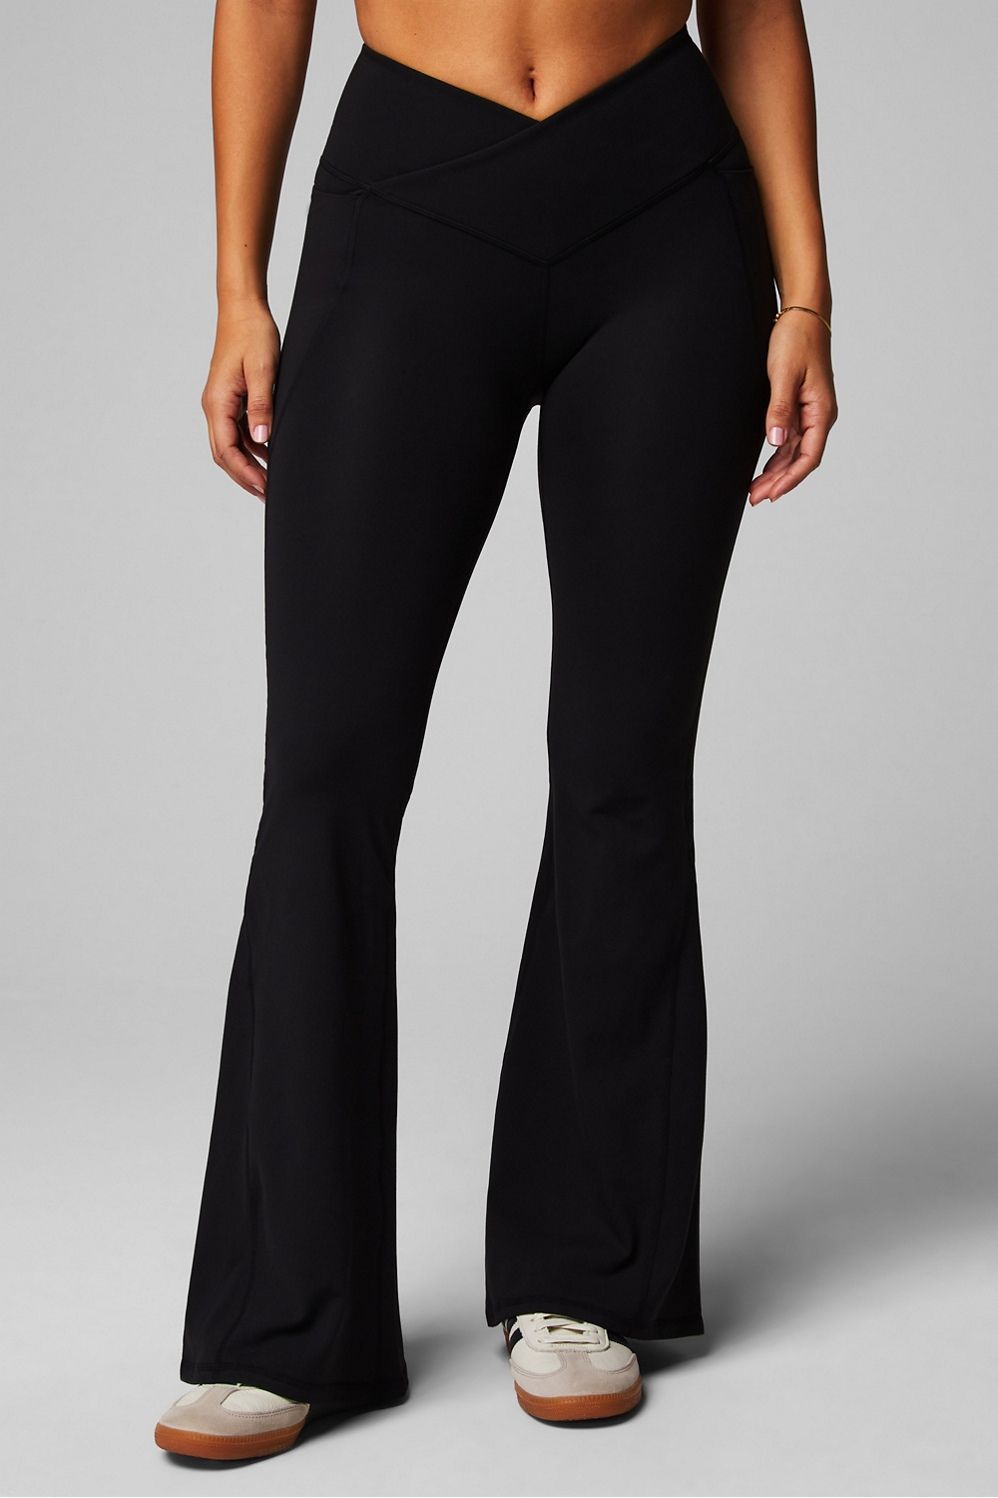 PureLuxe High-Waisted Crossover Flare | Fabletics - North America